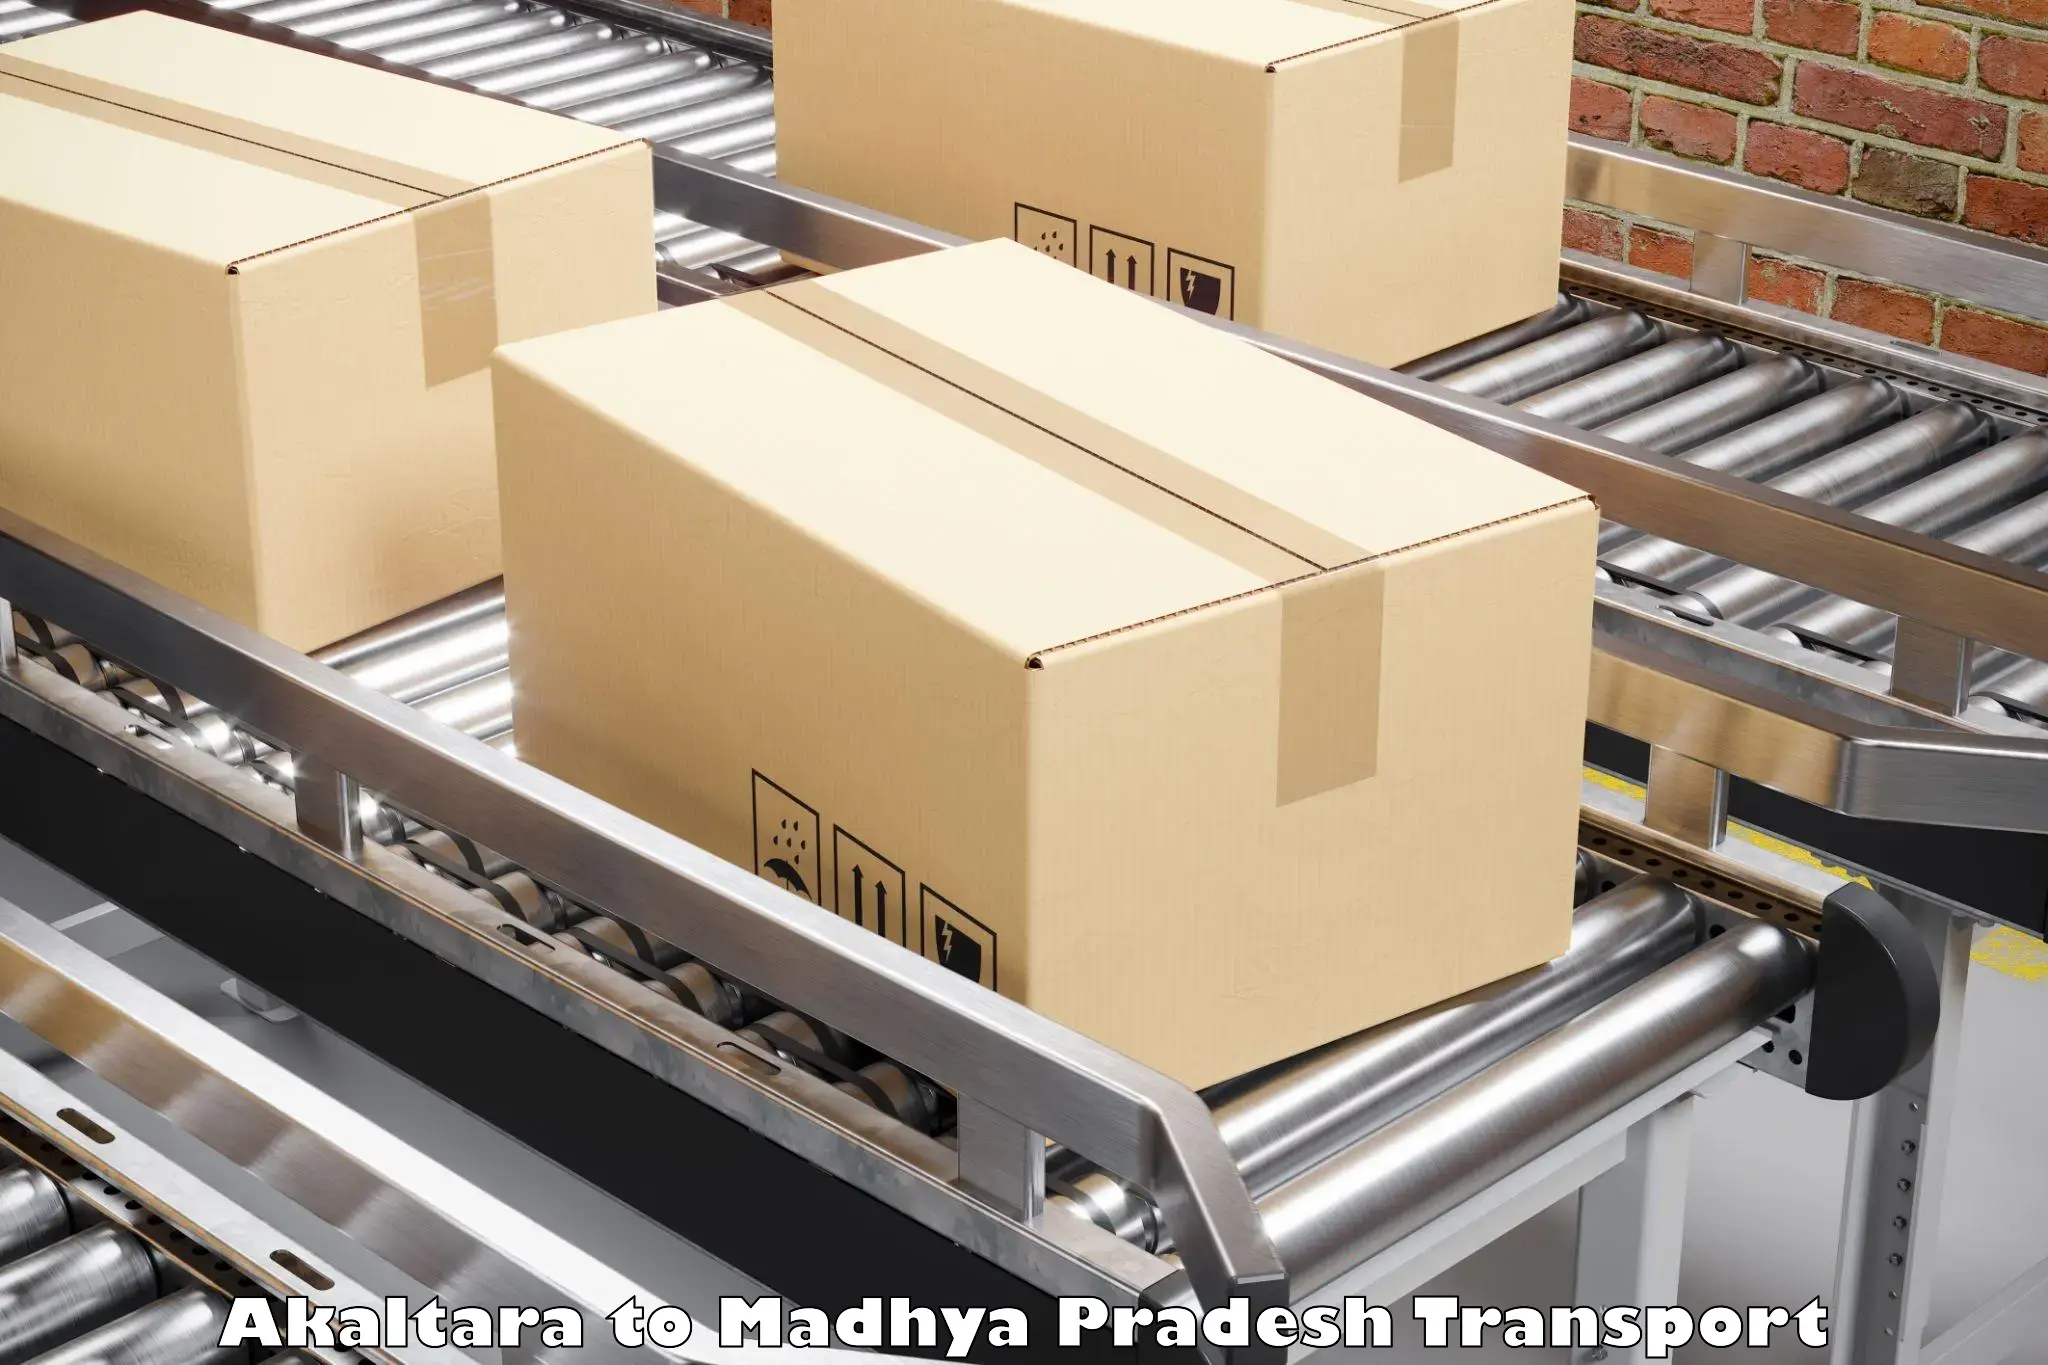 Daily parcel service transport Akaltara to IIT Indore